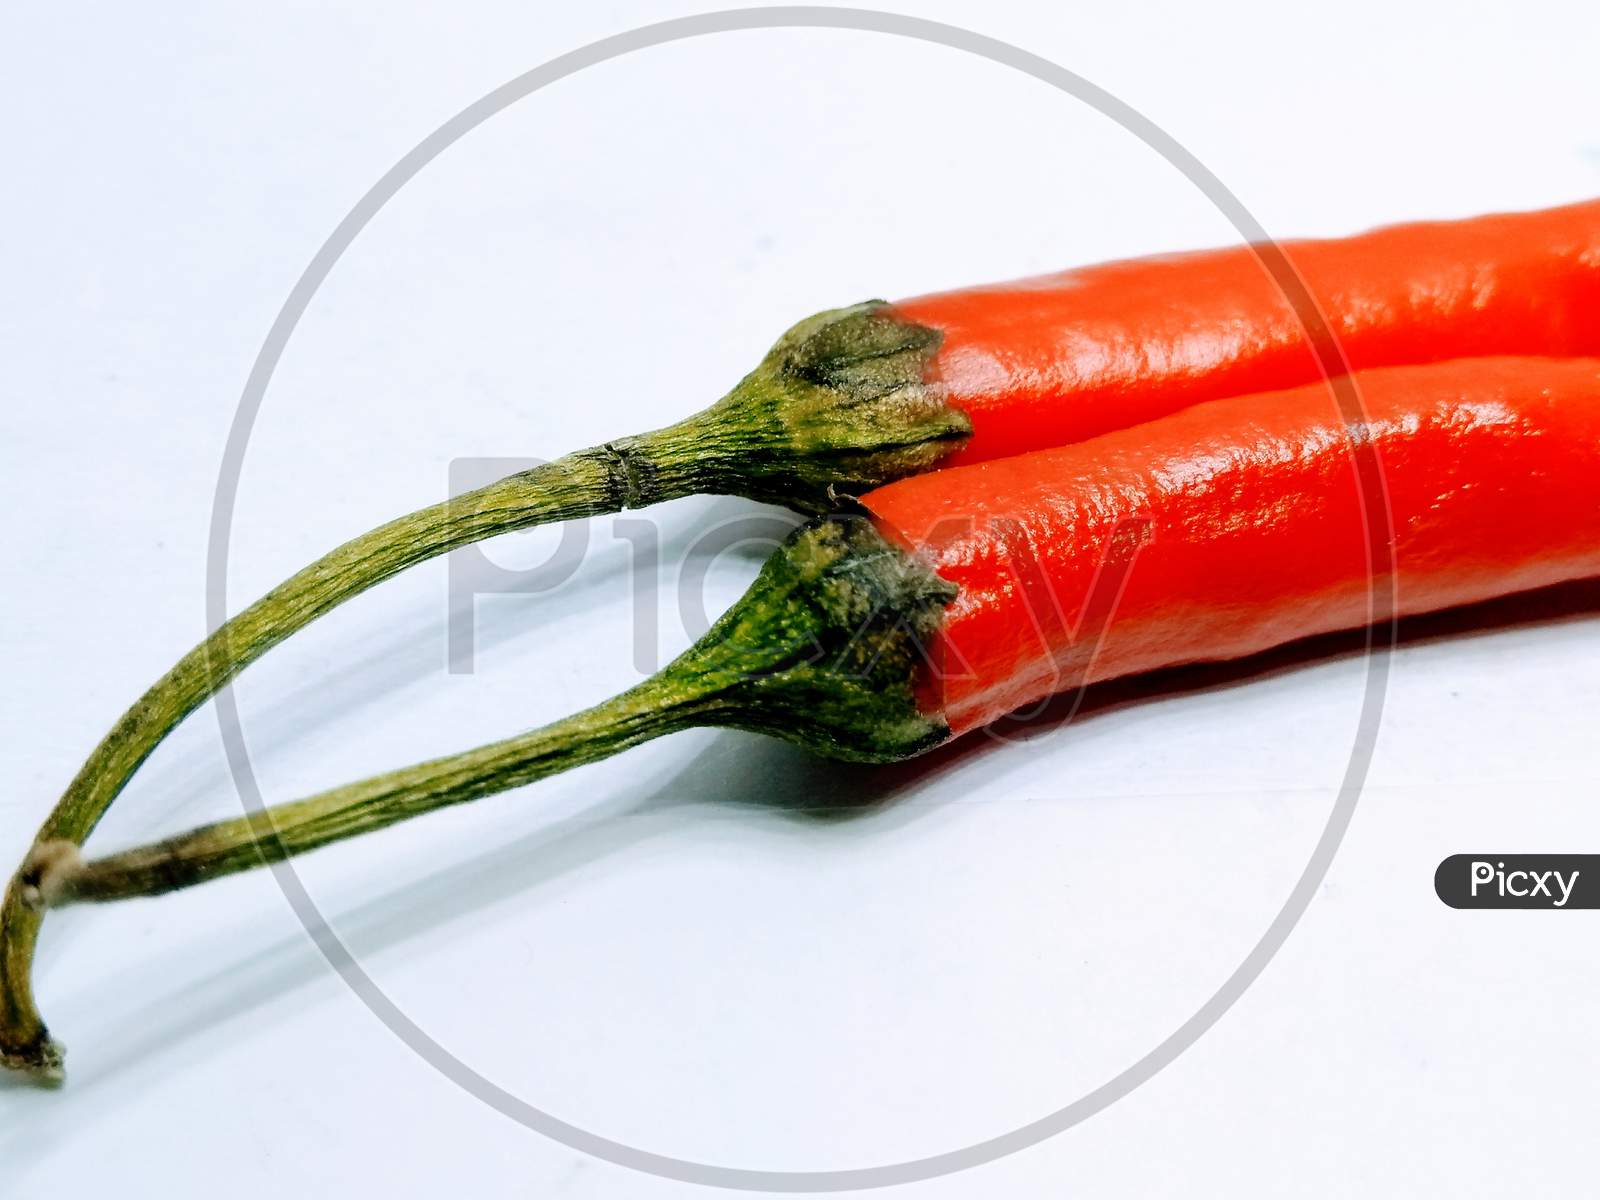 A picture of red chilli